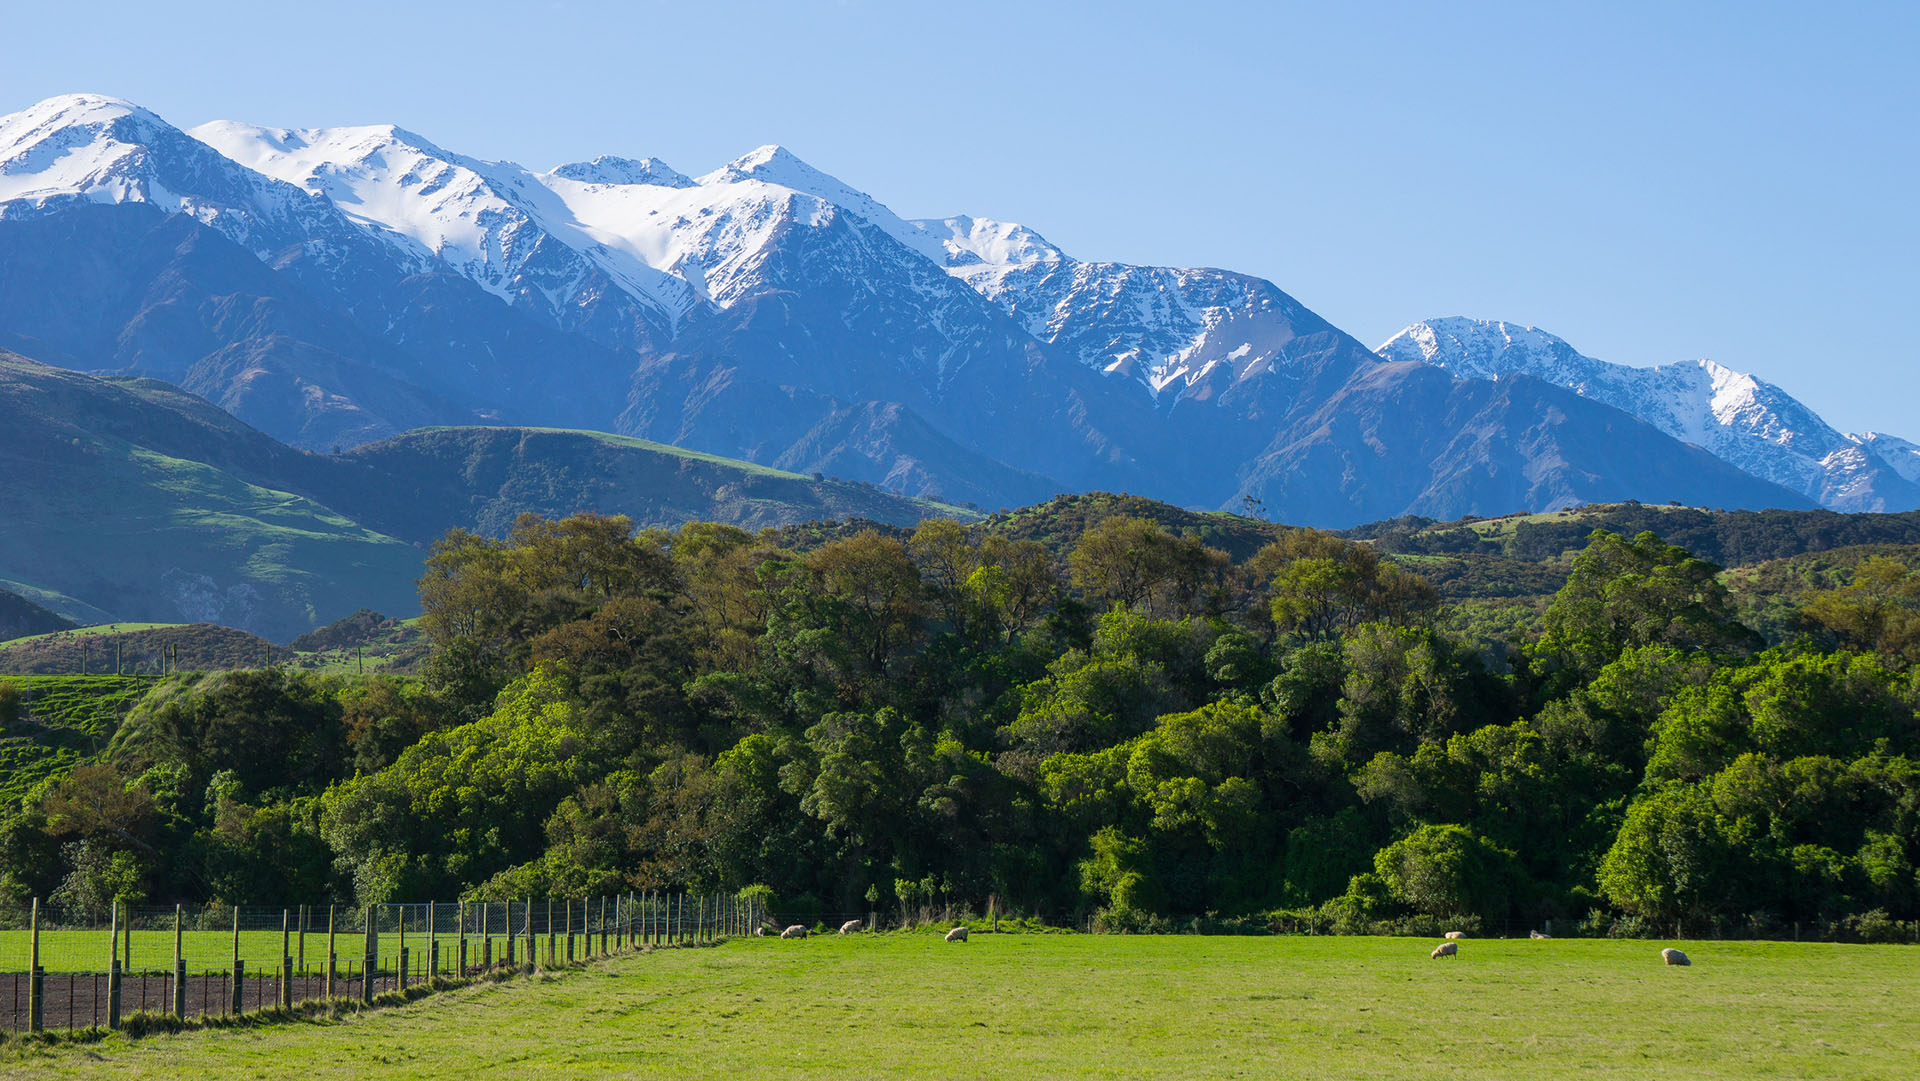 Scenic view of sheep farm with Kaikoura mountain in the background.